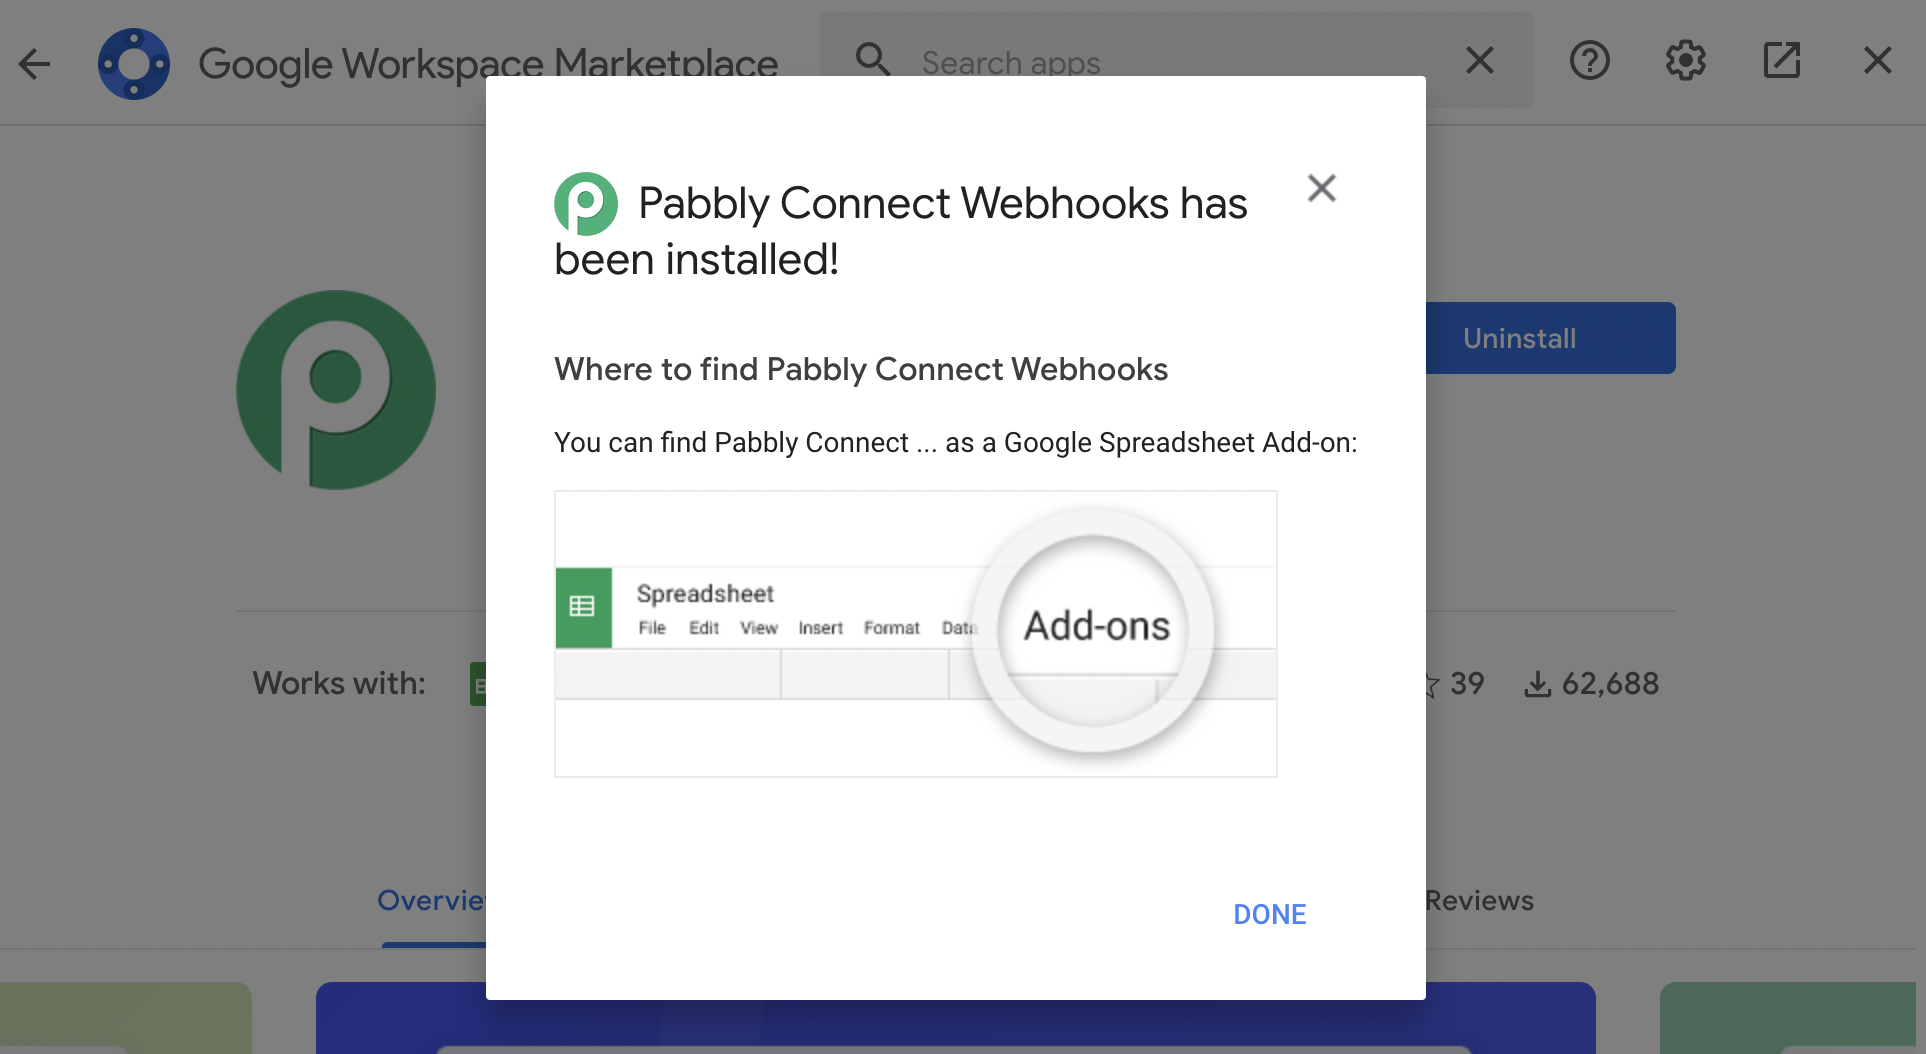 Pabbly Integration with Mailmodo